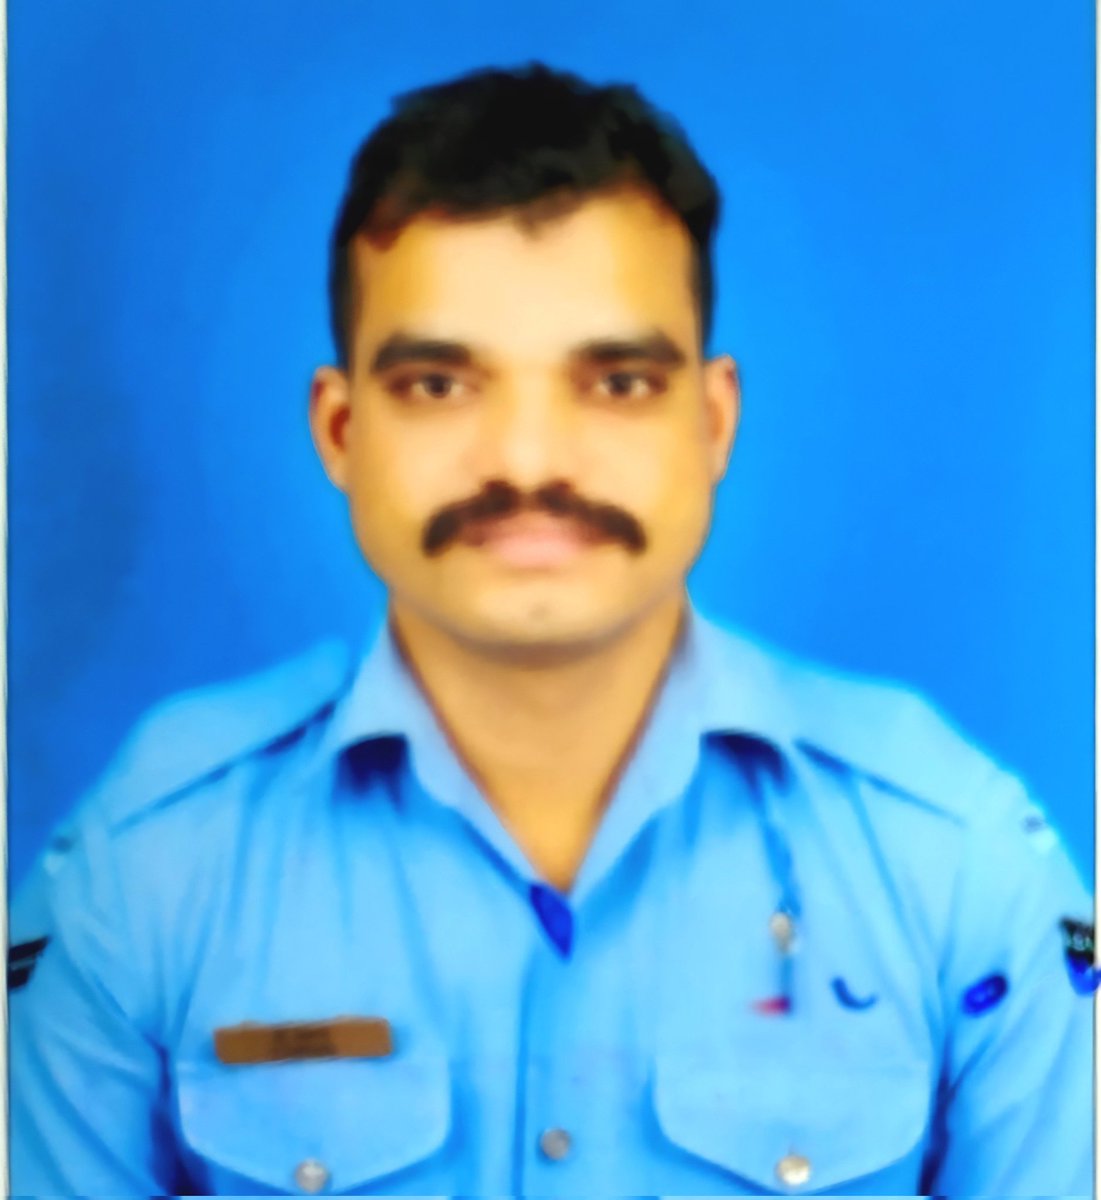 Our heartfelt tribute to Corporal Vikky Pahade of the Indian Air Force, who gallantly served our nation and sacrificed his life in the Poonch Sector. Assam Police stands in solidarity with our Armed Forces and the bereaved family during this difficult time. @IAF_MCC